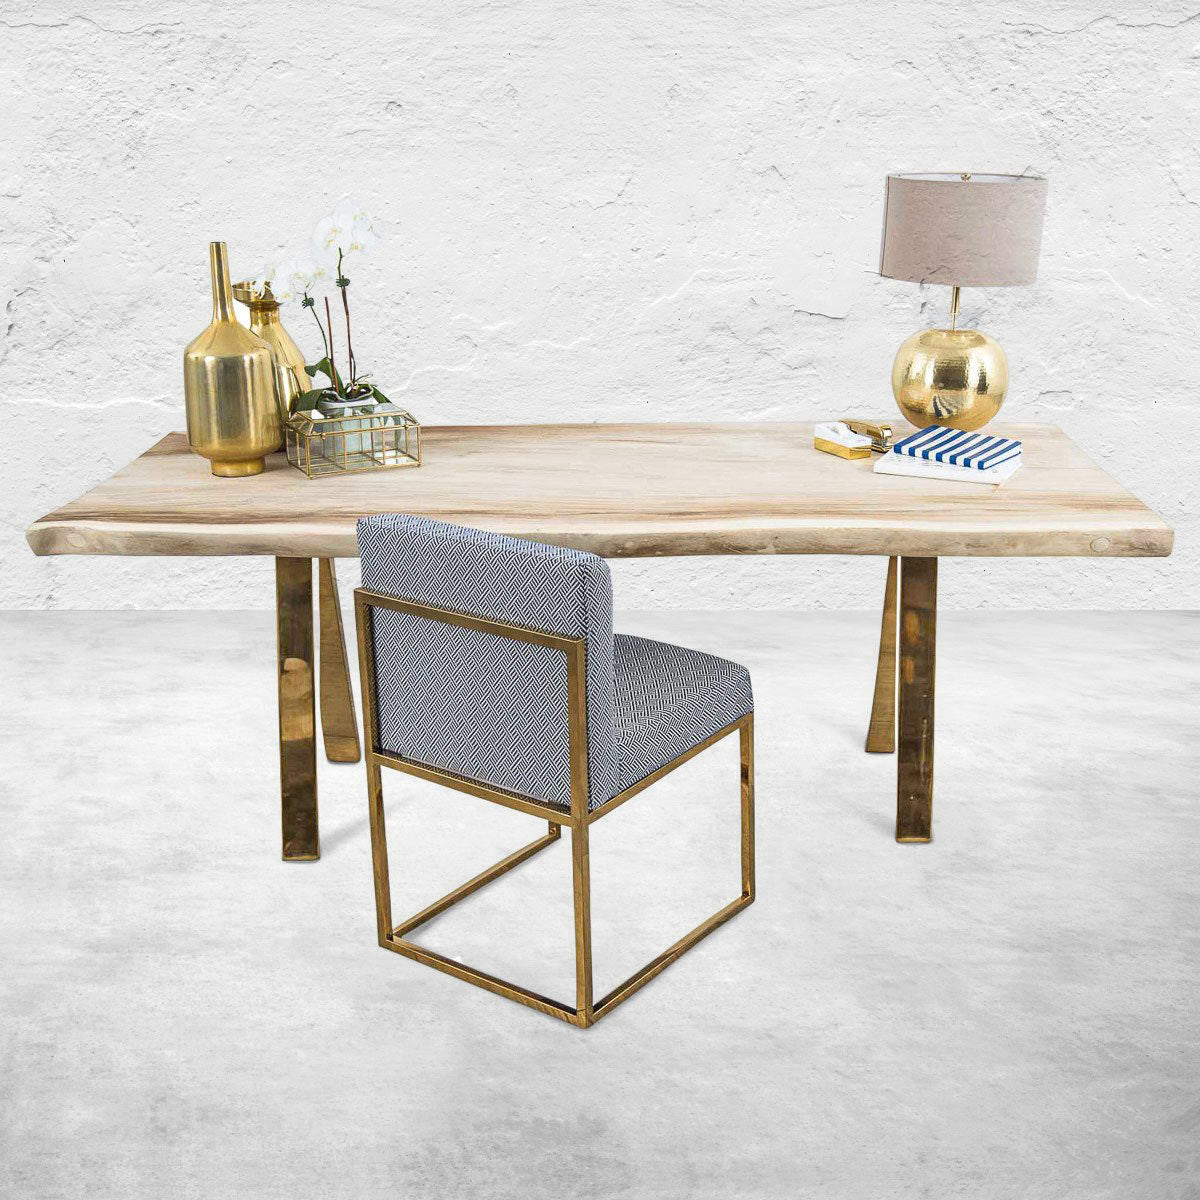 Bleached Eco Slab Desk with Brass A-Frame Legs